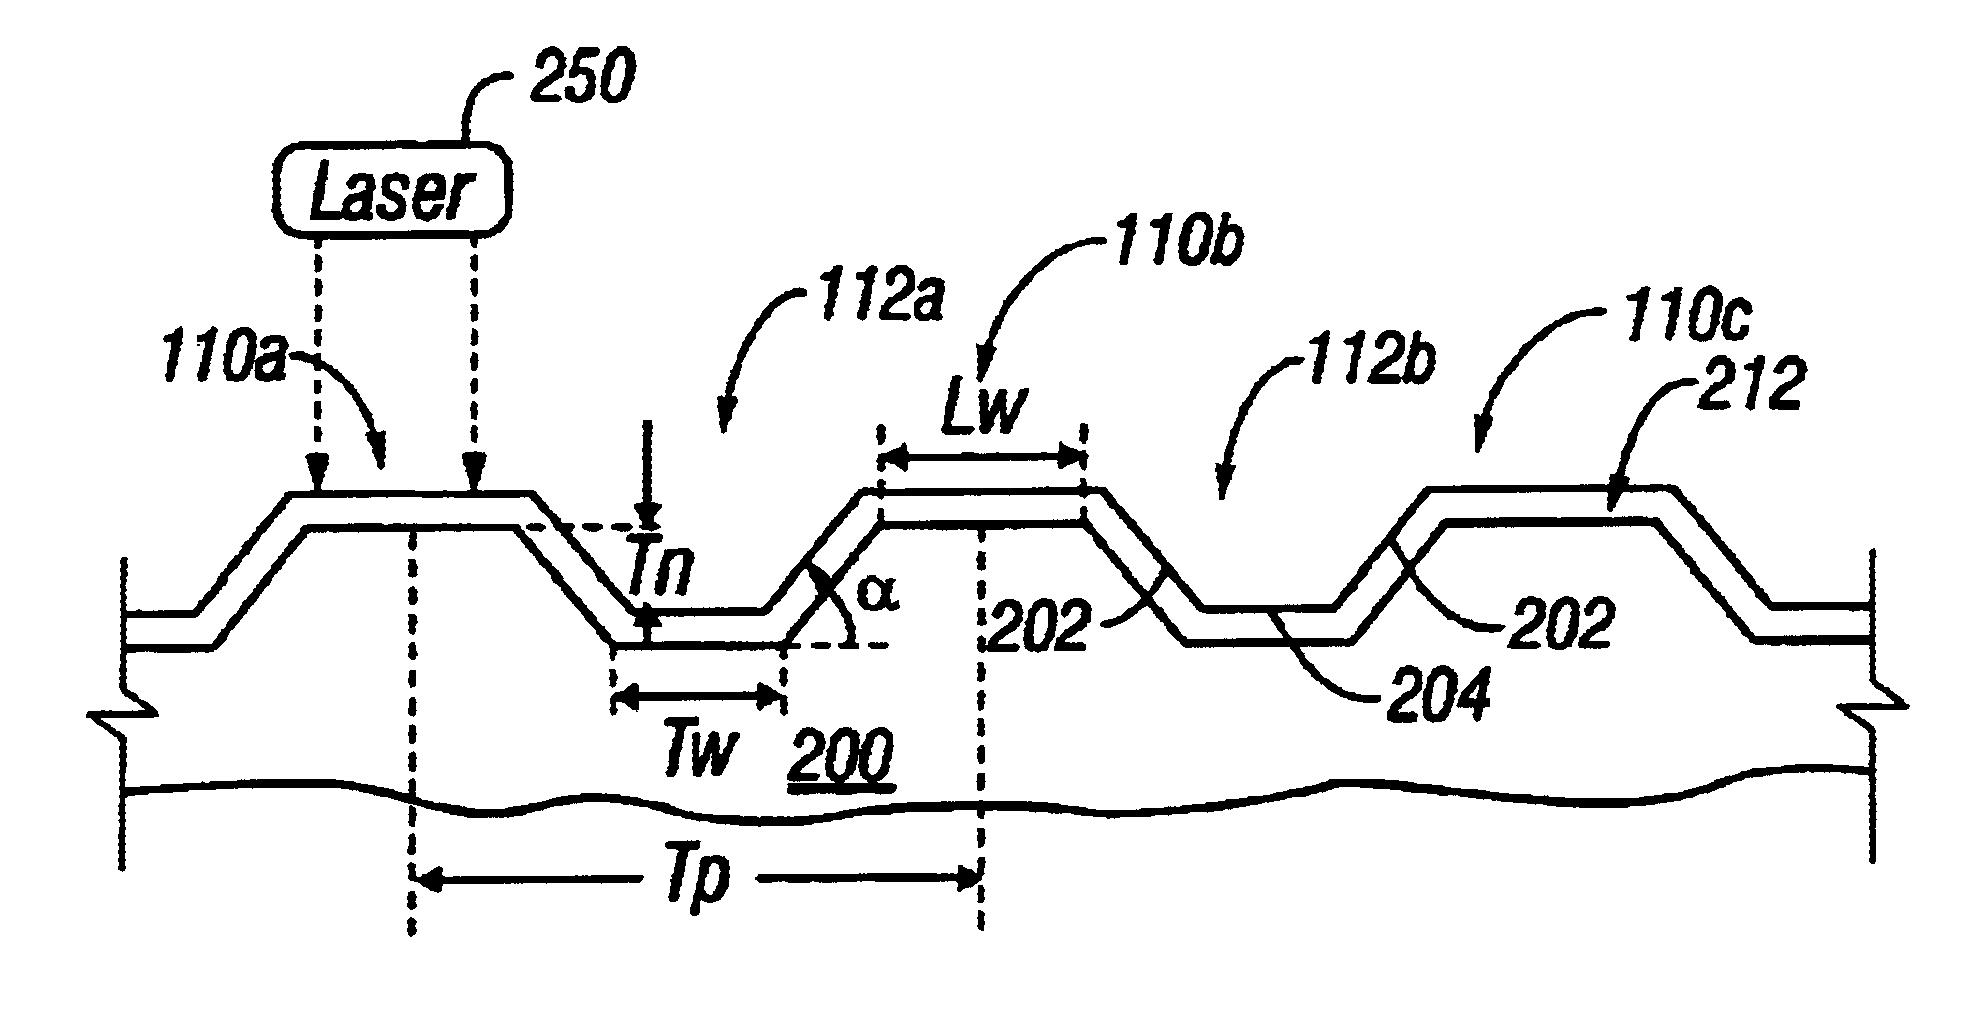 Double-sided hybrid optical disk with surface topology